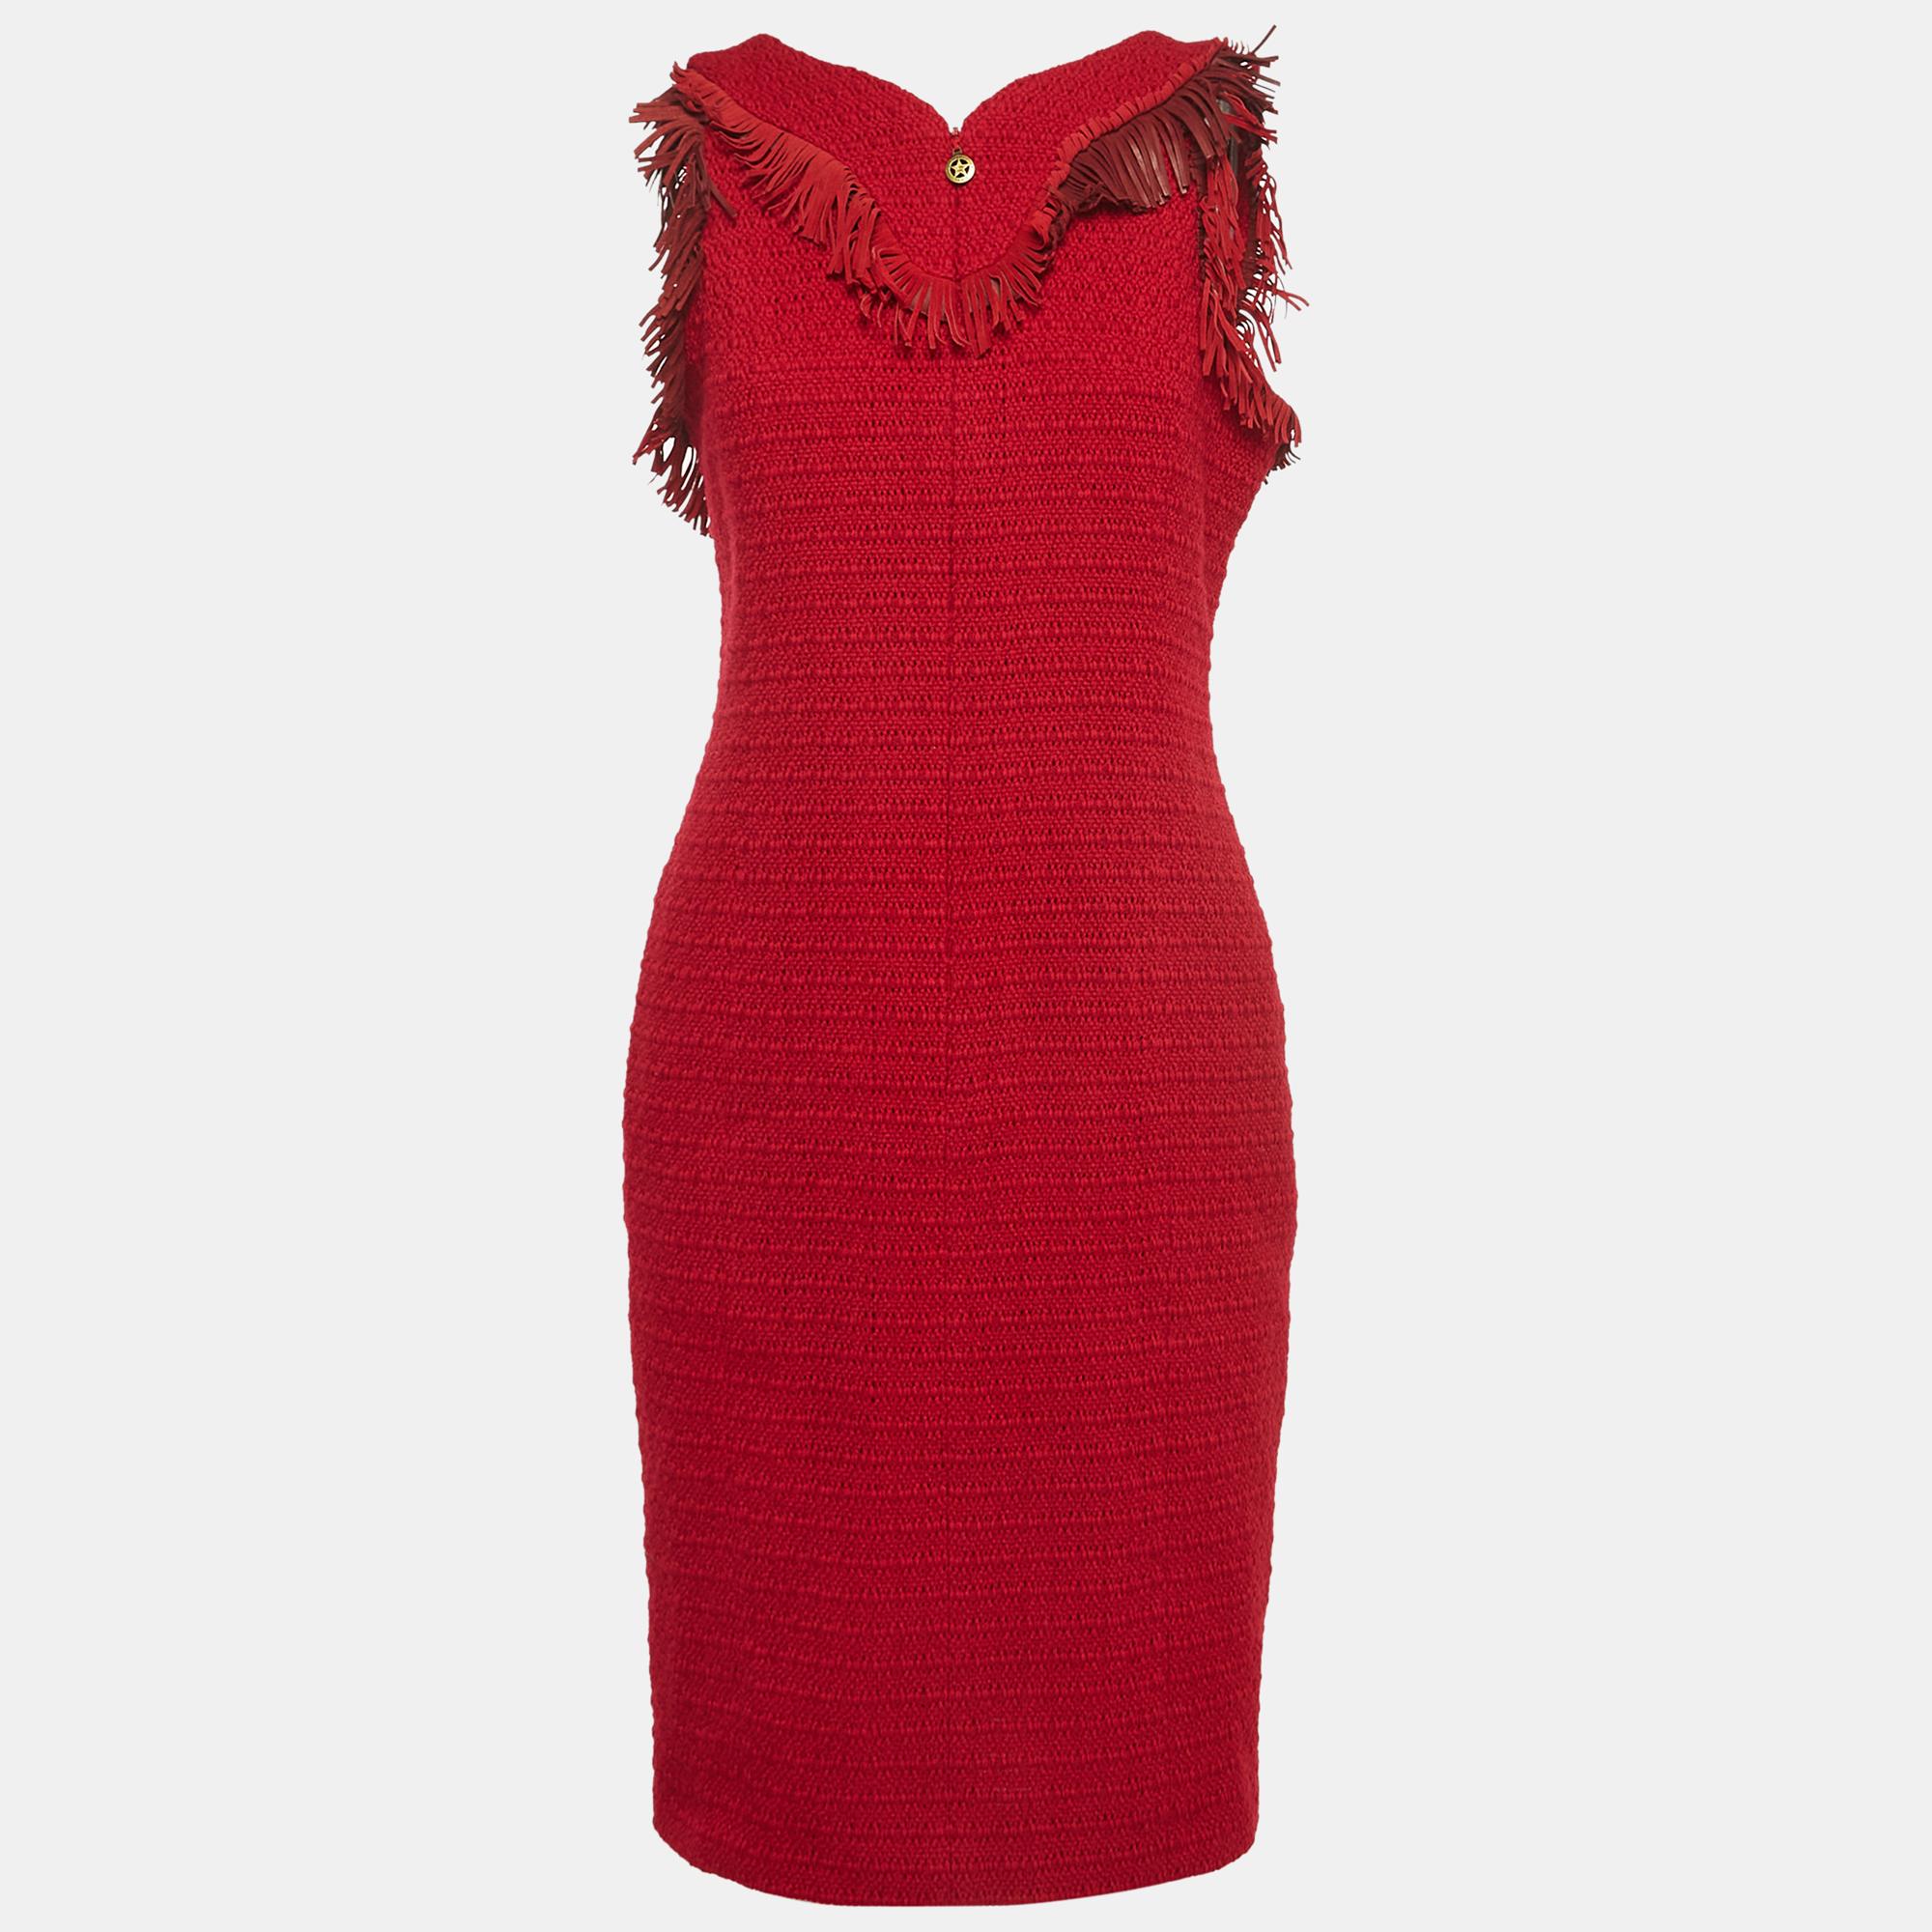 The Chanel dress exudes timeless elegance. The vibrant red hue complements the intricate tweed fabric, while suede fringe accents add movement and sophistication. The sleeveless design and short length create a chic and versatile ensemble for any